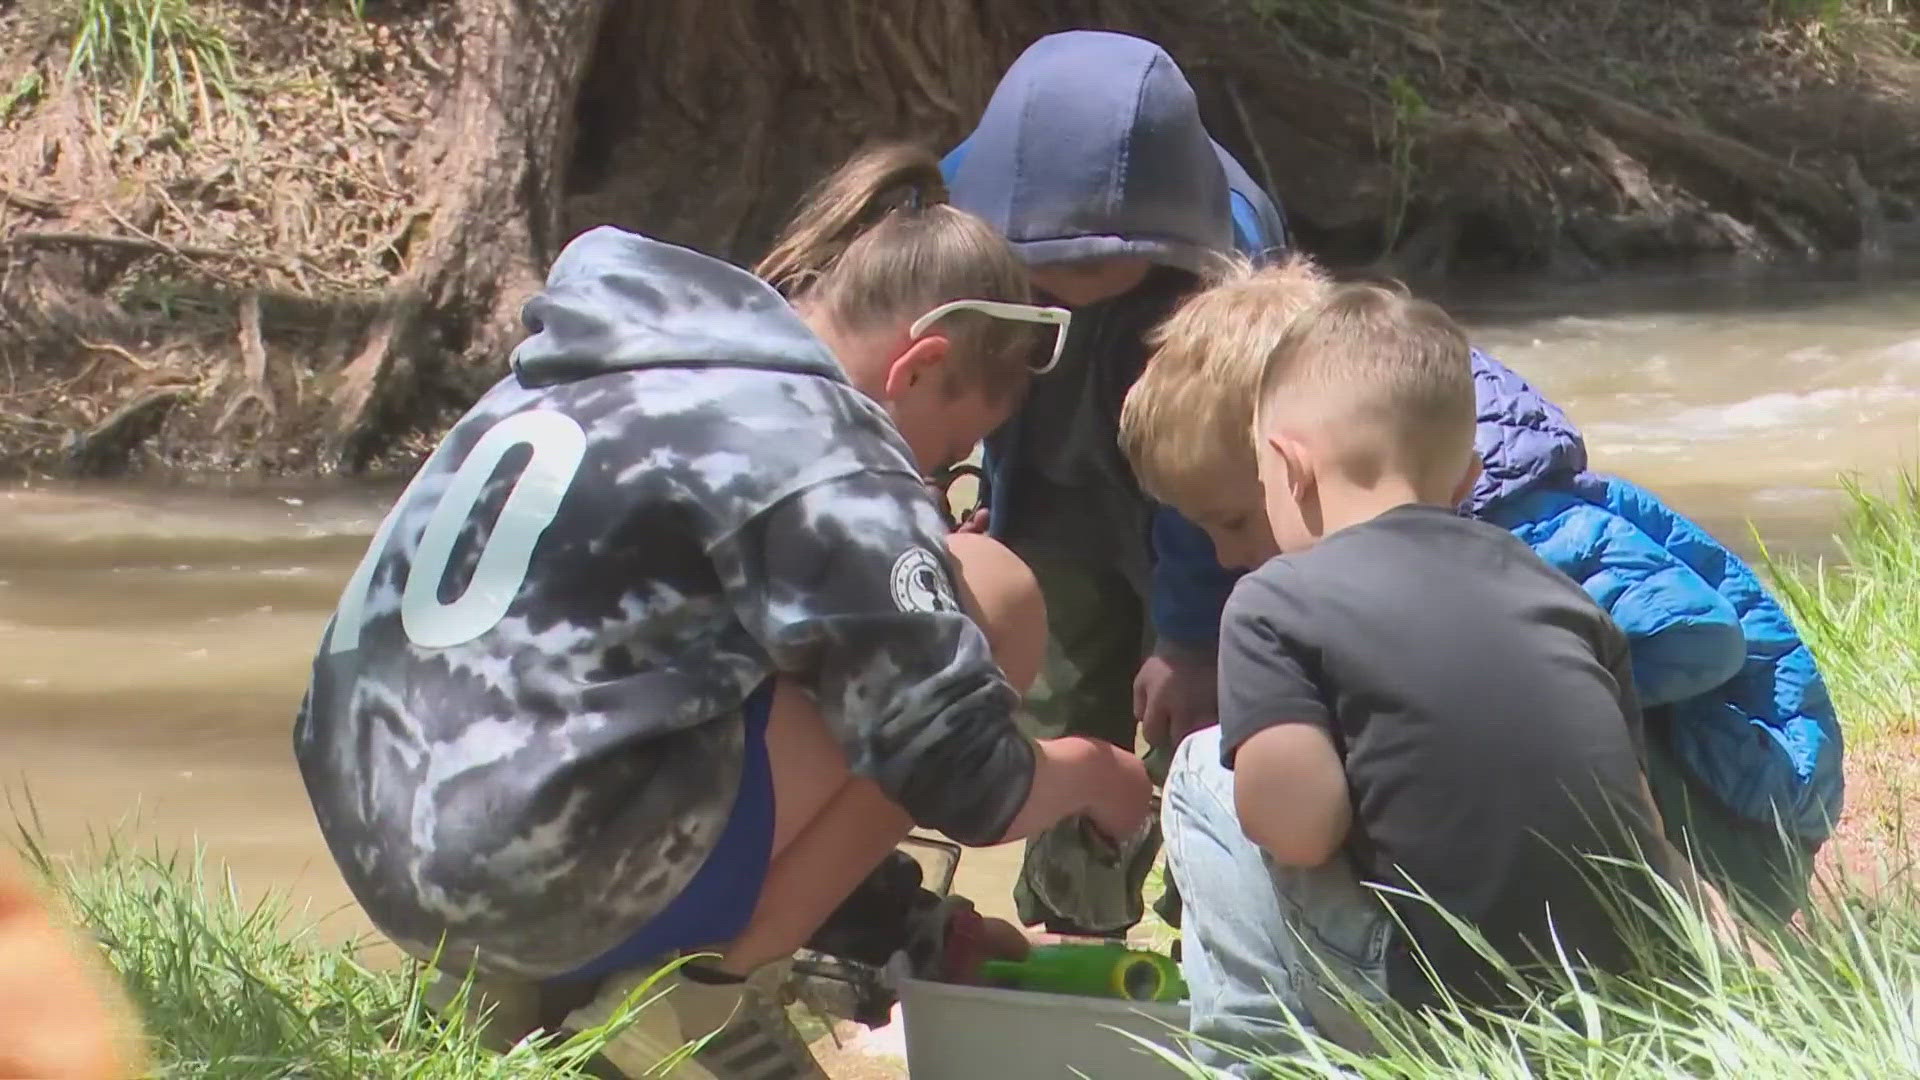 The release was part of a four-week project, where the students took care of dozens of baby trout.